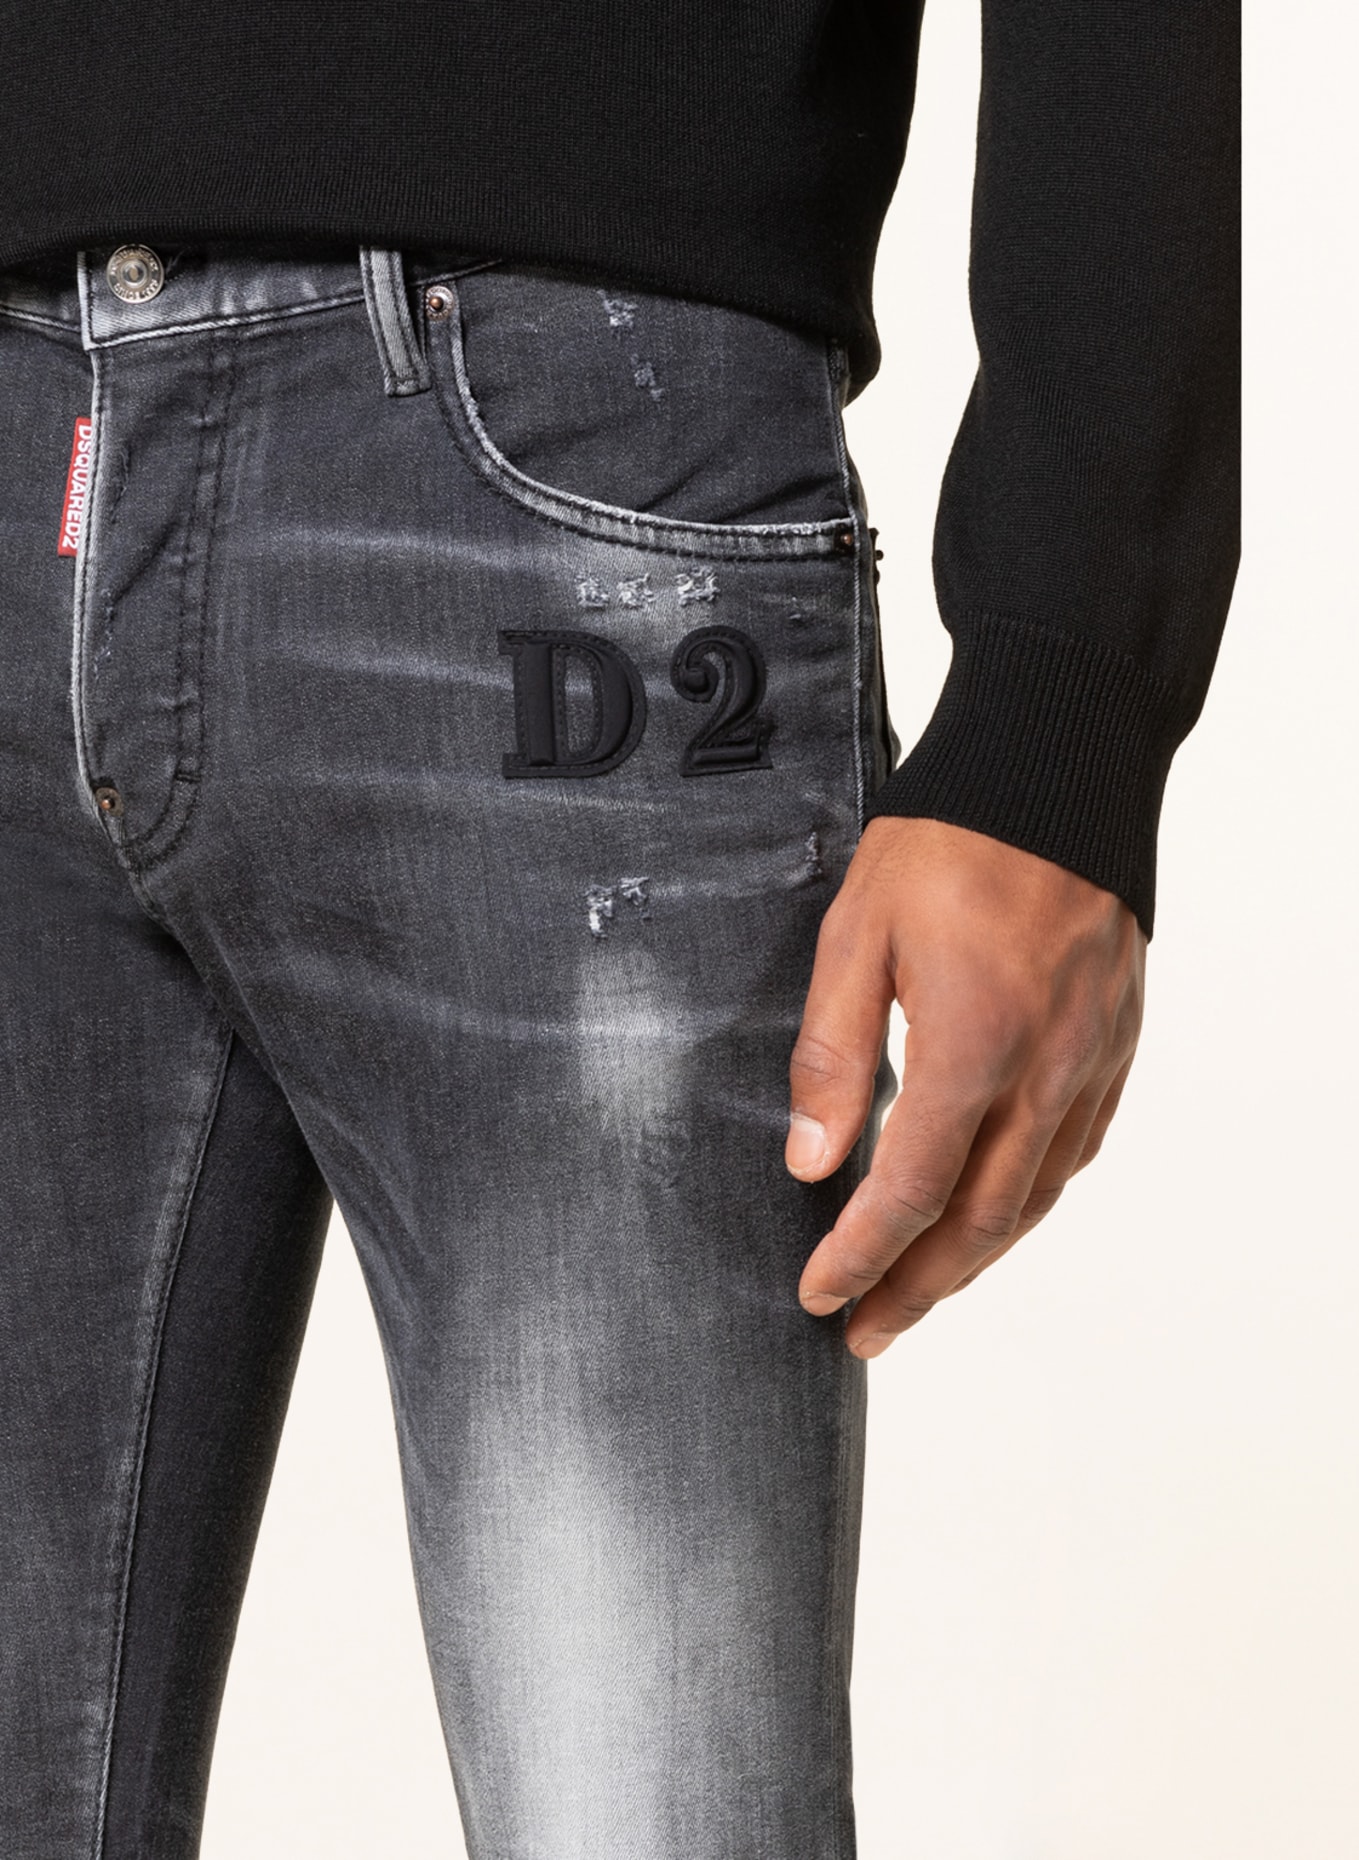 DSQUARED2 Jeans SUPER TWINKY Extra Slim Fit